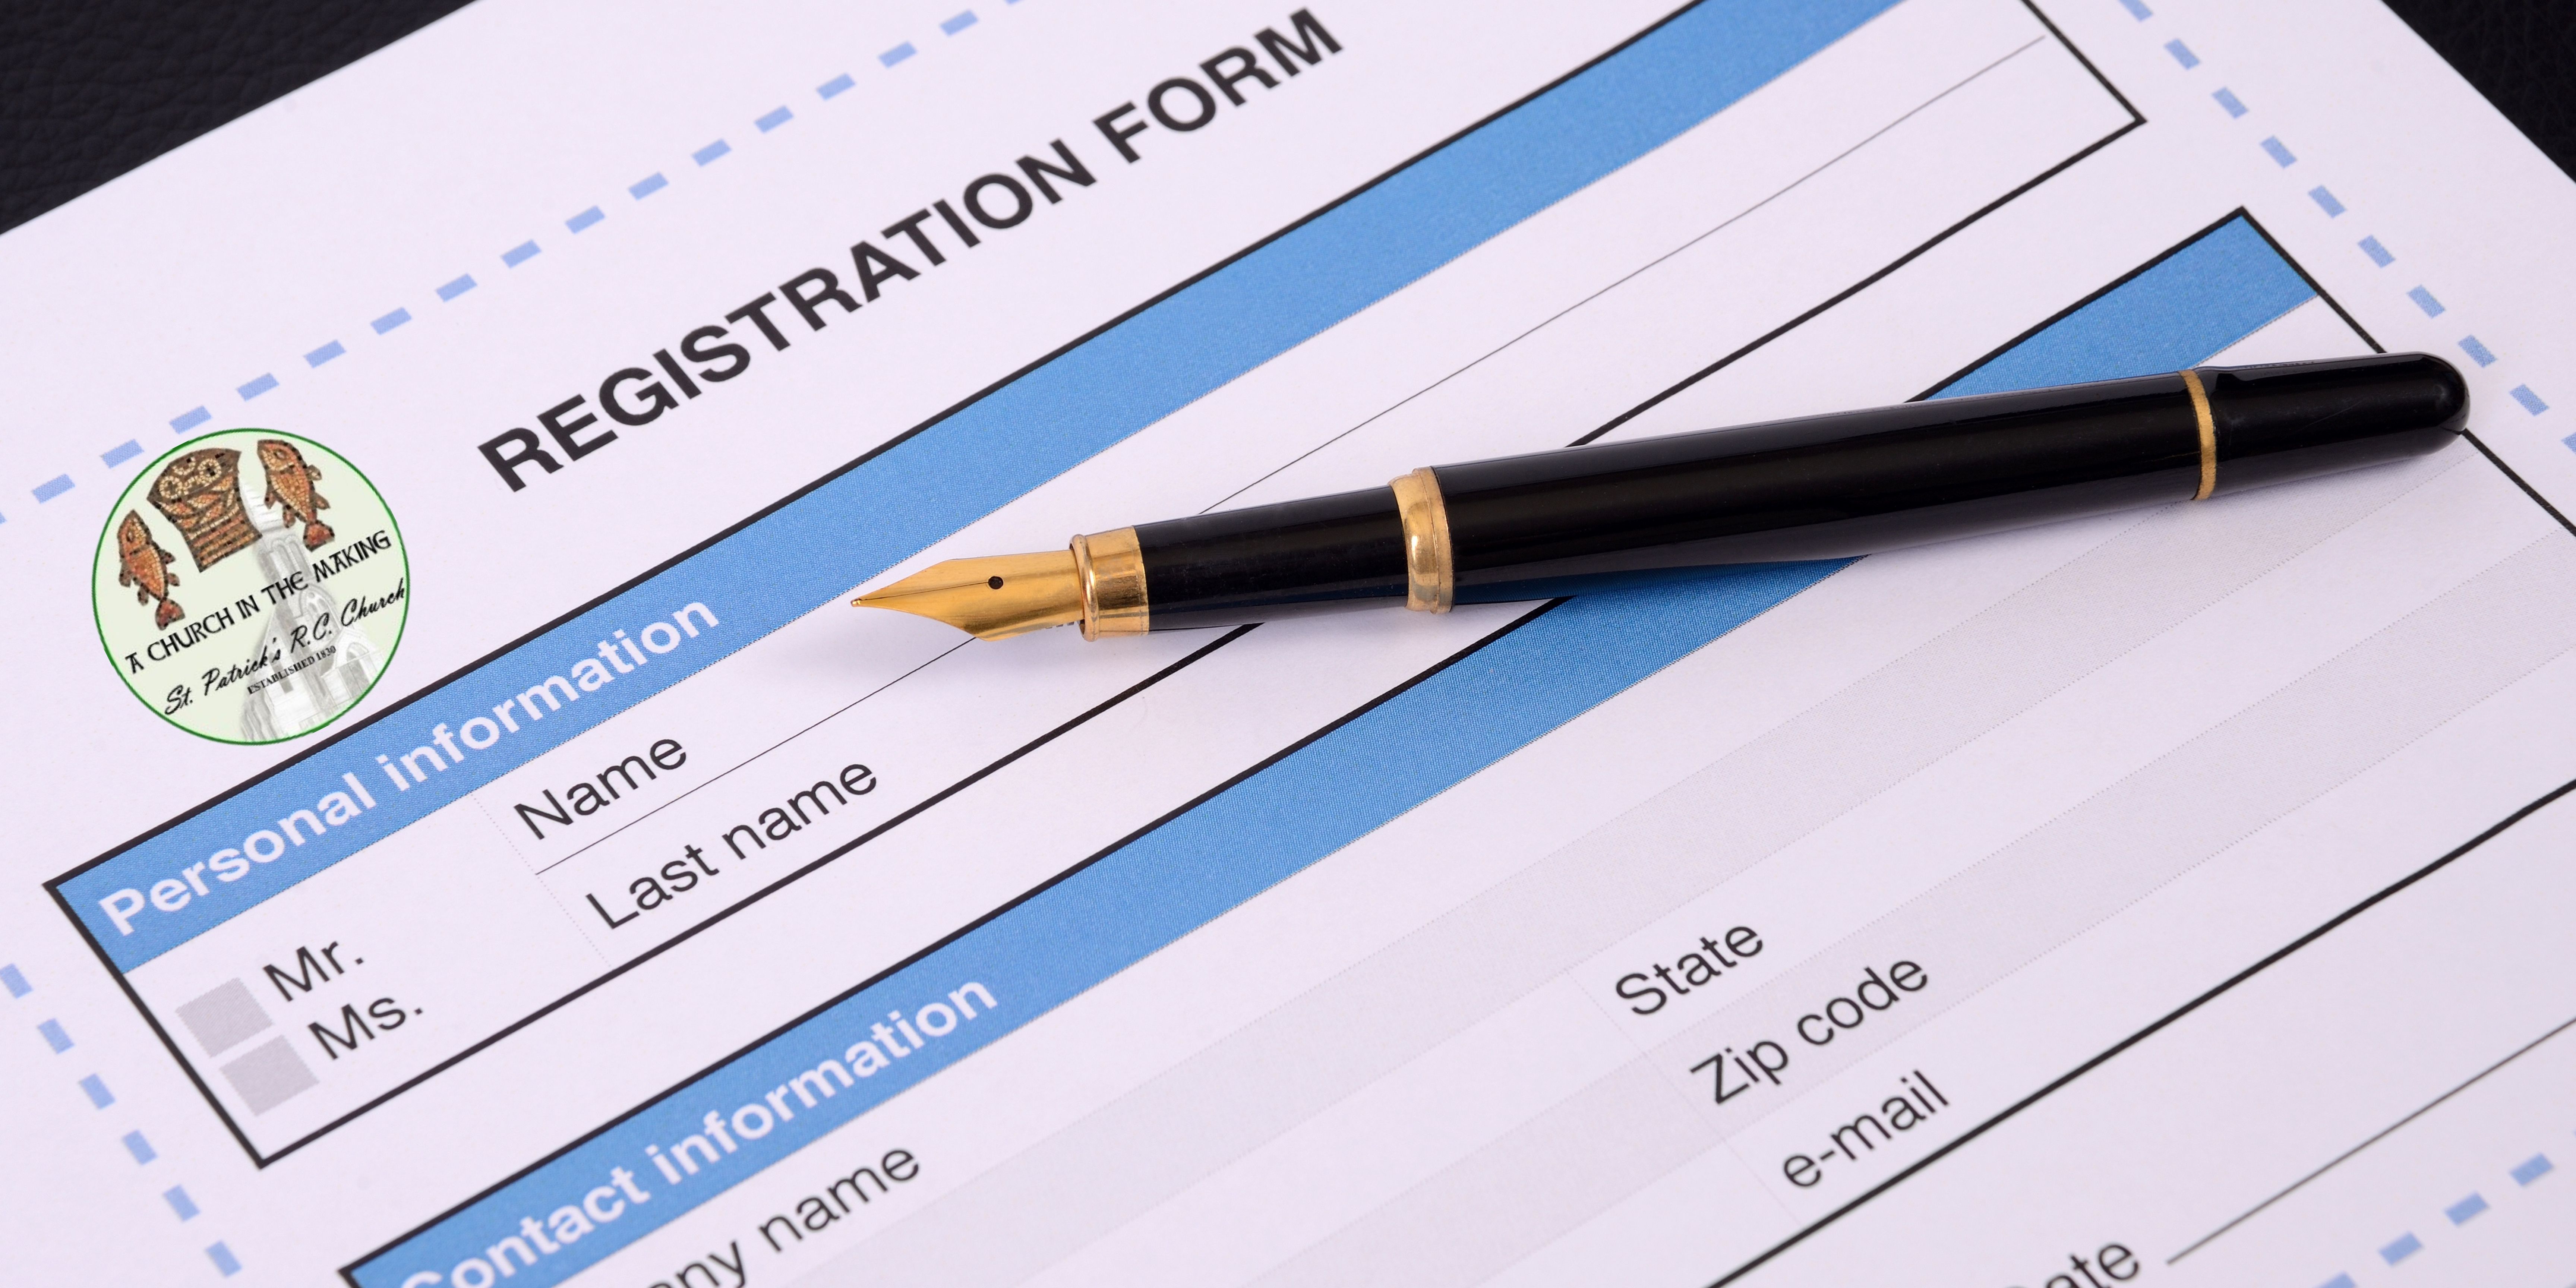 Registration form header, an image of a blank registration form with a ball point pen laid across with the logo of the church